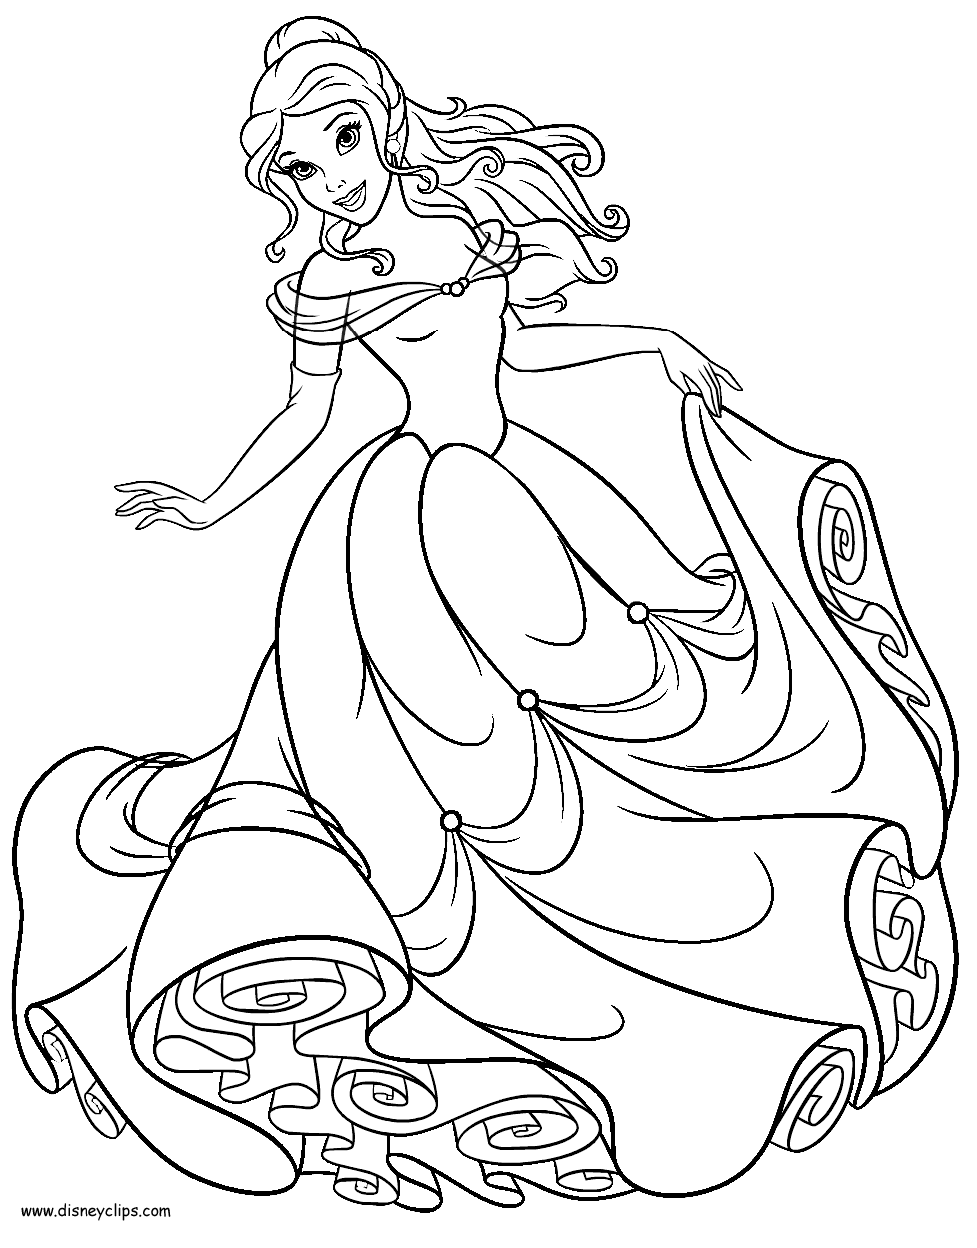 belle to color belle coloring pages getcoloringpagescom color belle to 